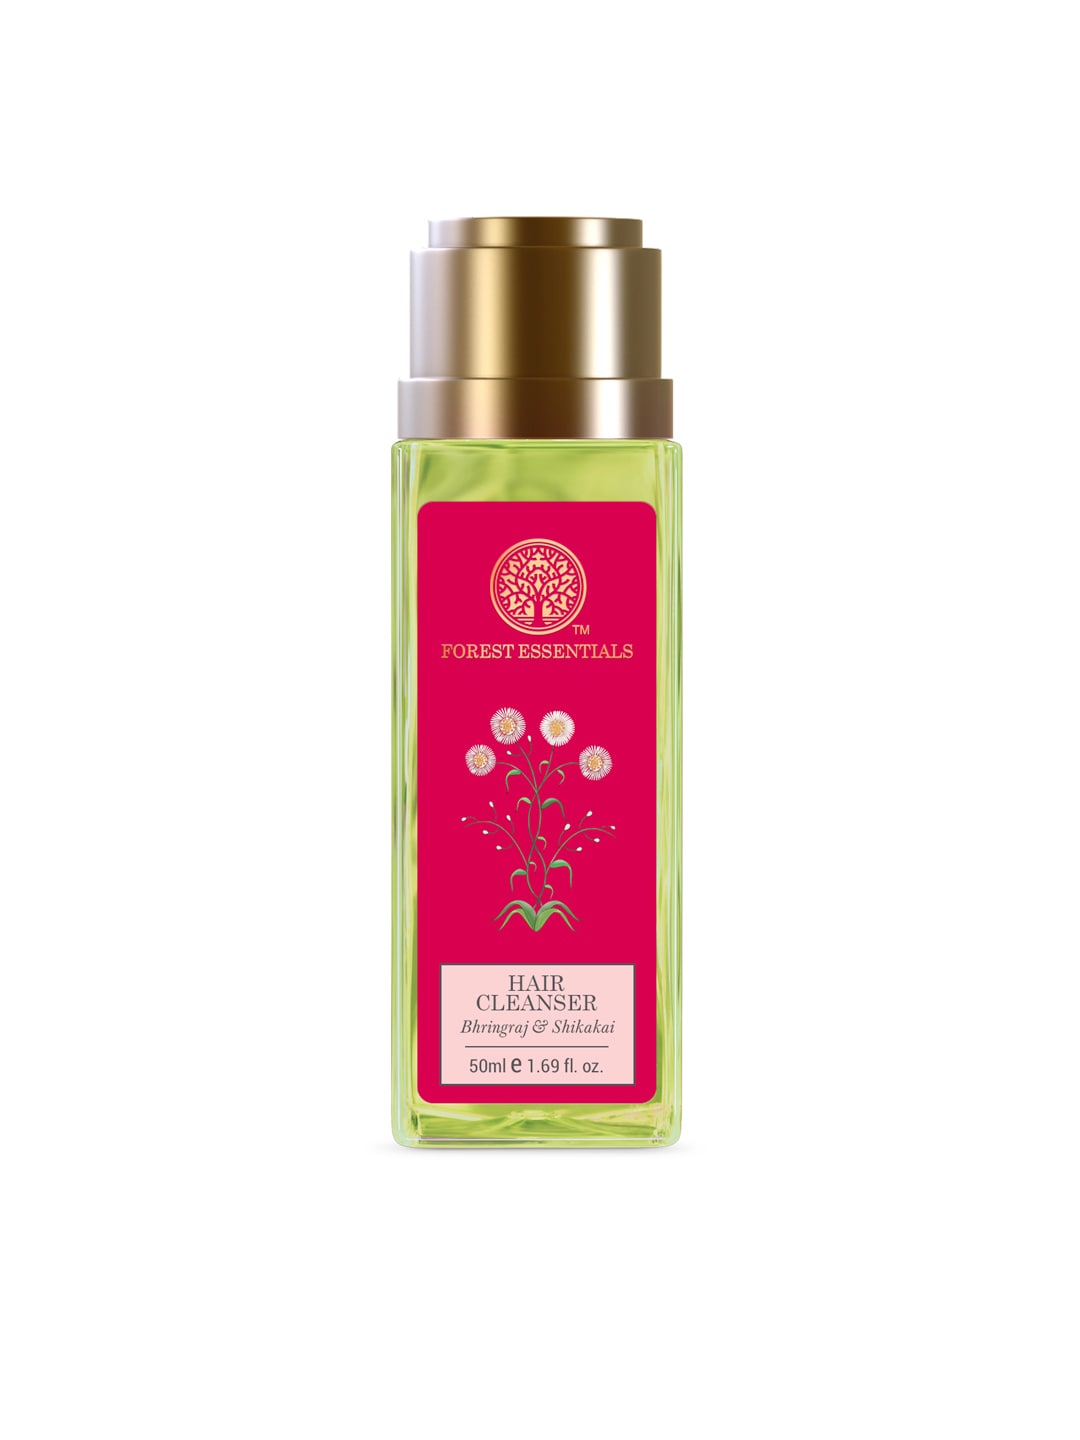 Forest Essentials Travel Size Hair Cleanser Bhringraj & Shikakai 50ml  Shampoo Price in India, Full Specifications & Offers 